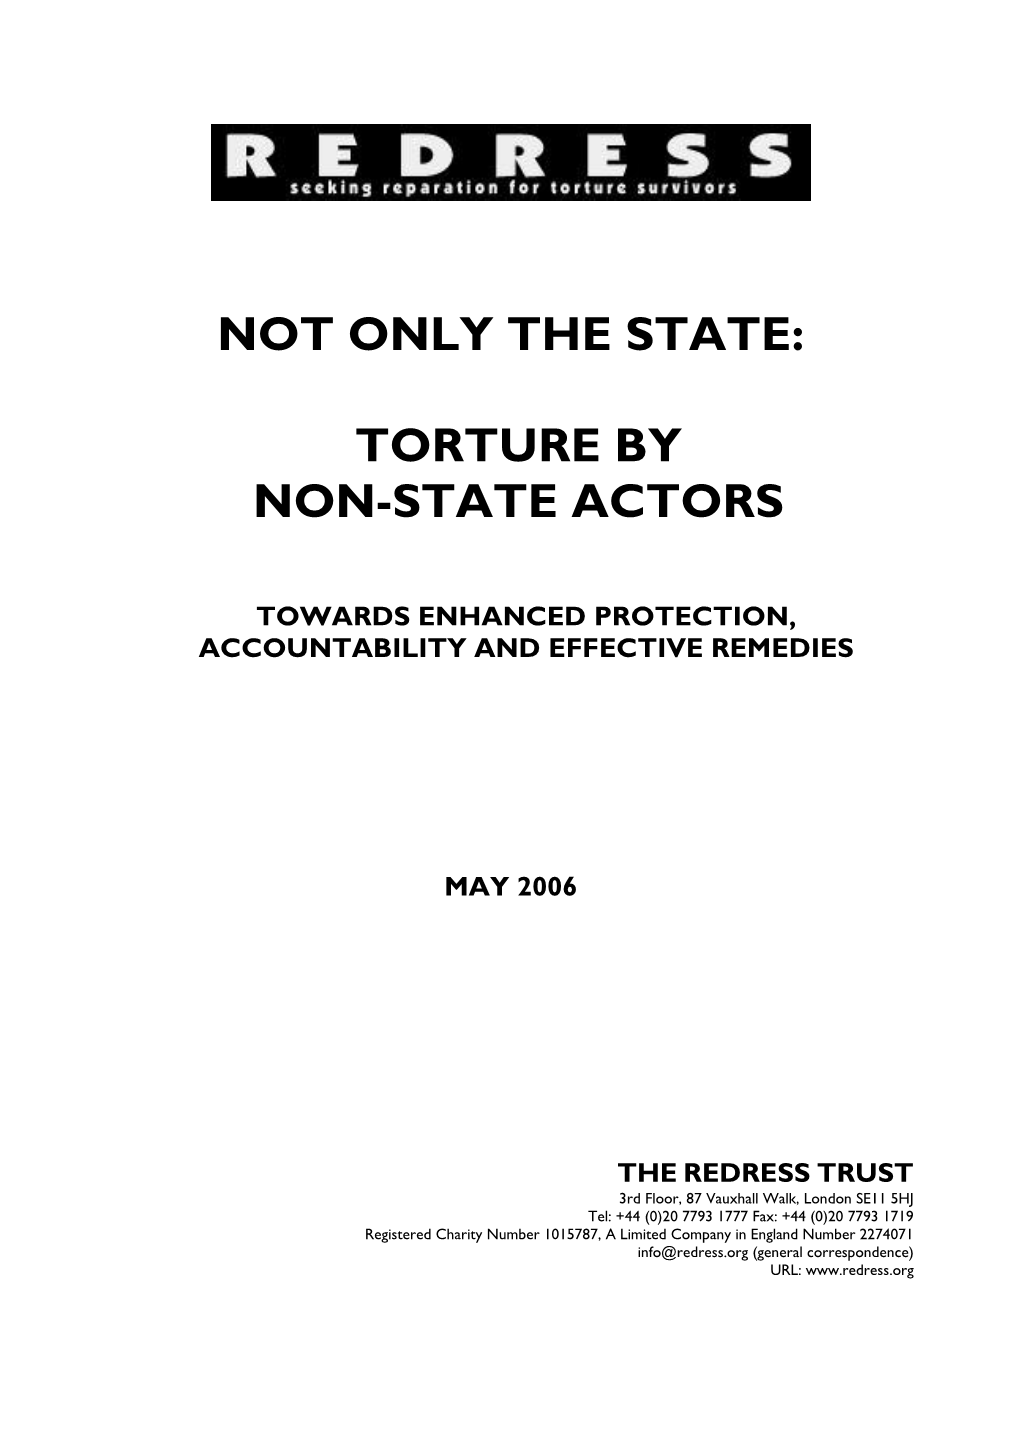 Torture by Non-State Actors